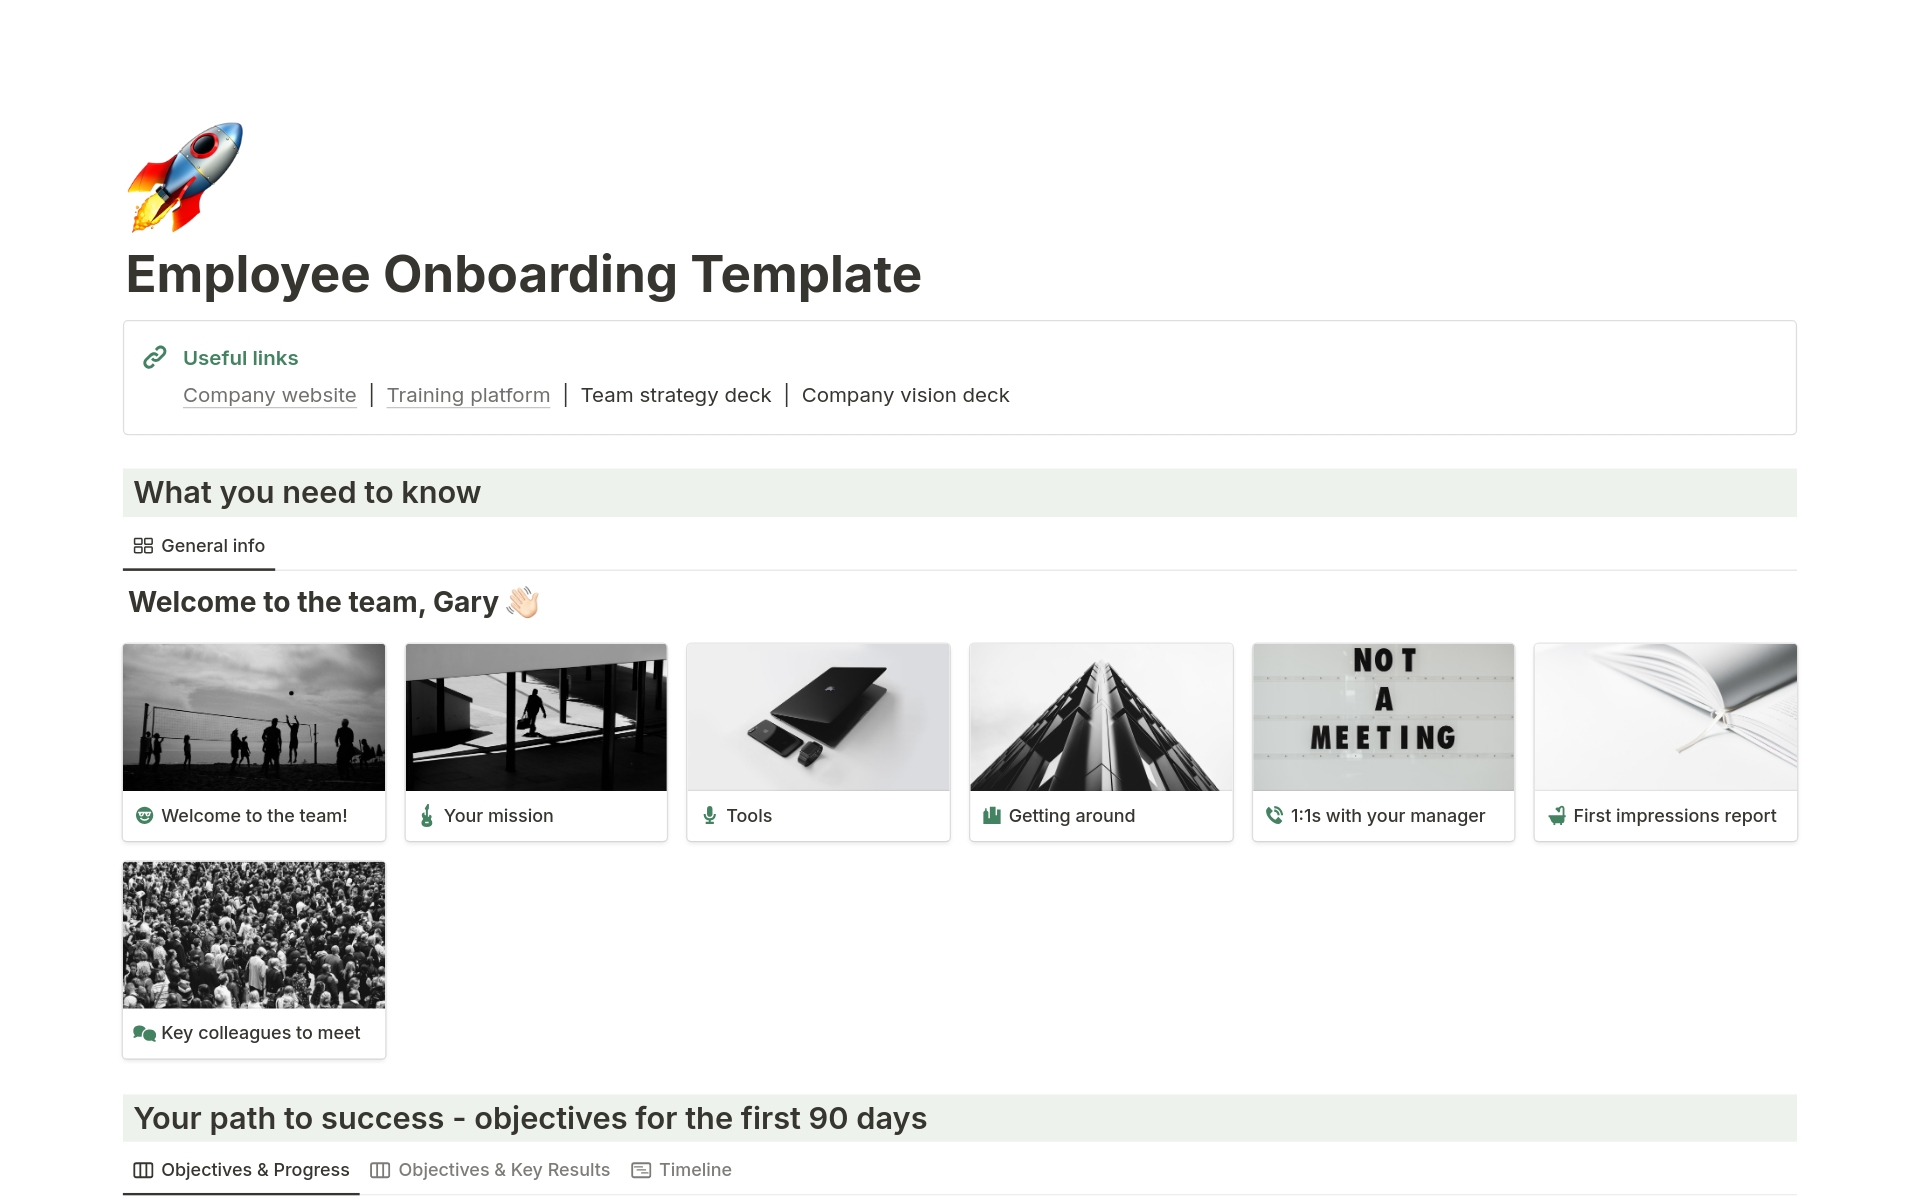 A shared portal for your new hire. Get ready for their first day in your team with the Employee Onboarding template. Using the 30-60-90 system to ensure progressive and stable onboarding. 